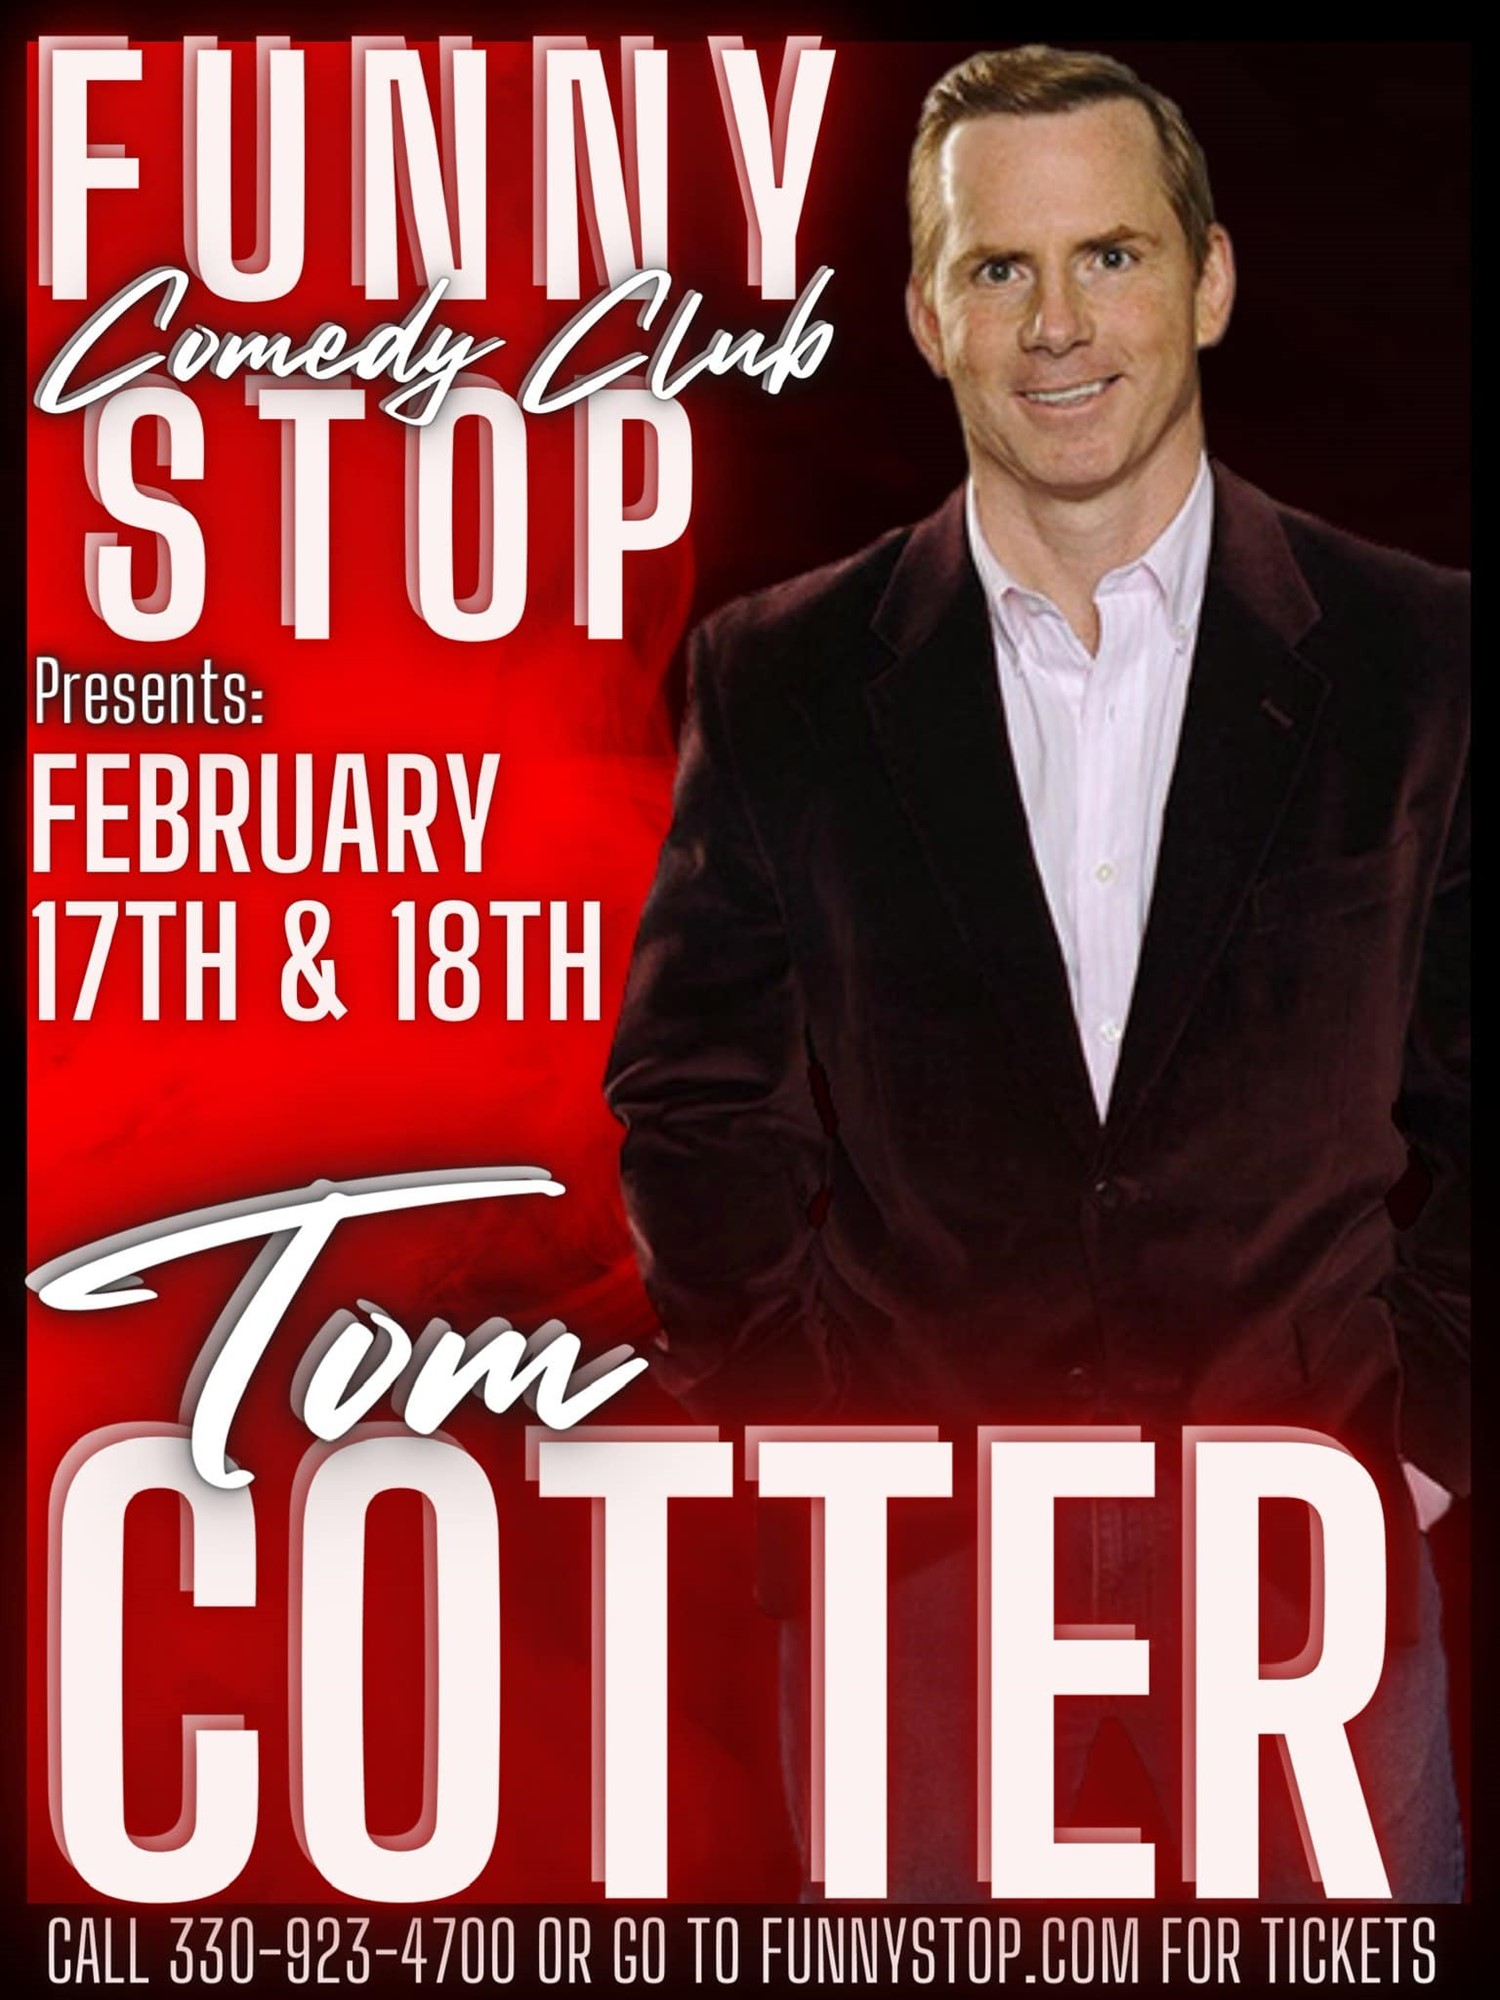 Tom Cotter Fri. 7:30pm Show Funny Stop Comedy Club on feb. 17, 19:30@Funny Stop Comedy Club - Compra entradas y obtén información enFunny Stop funnystop.online